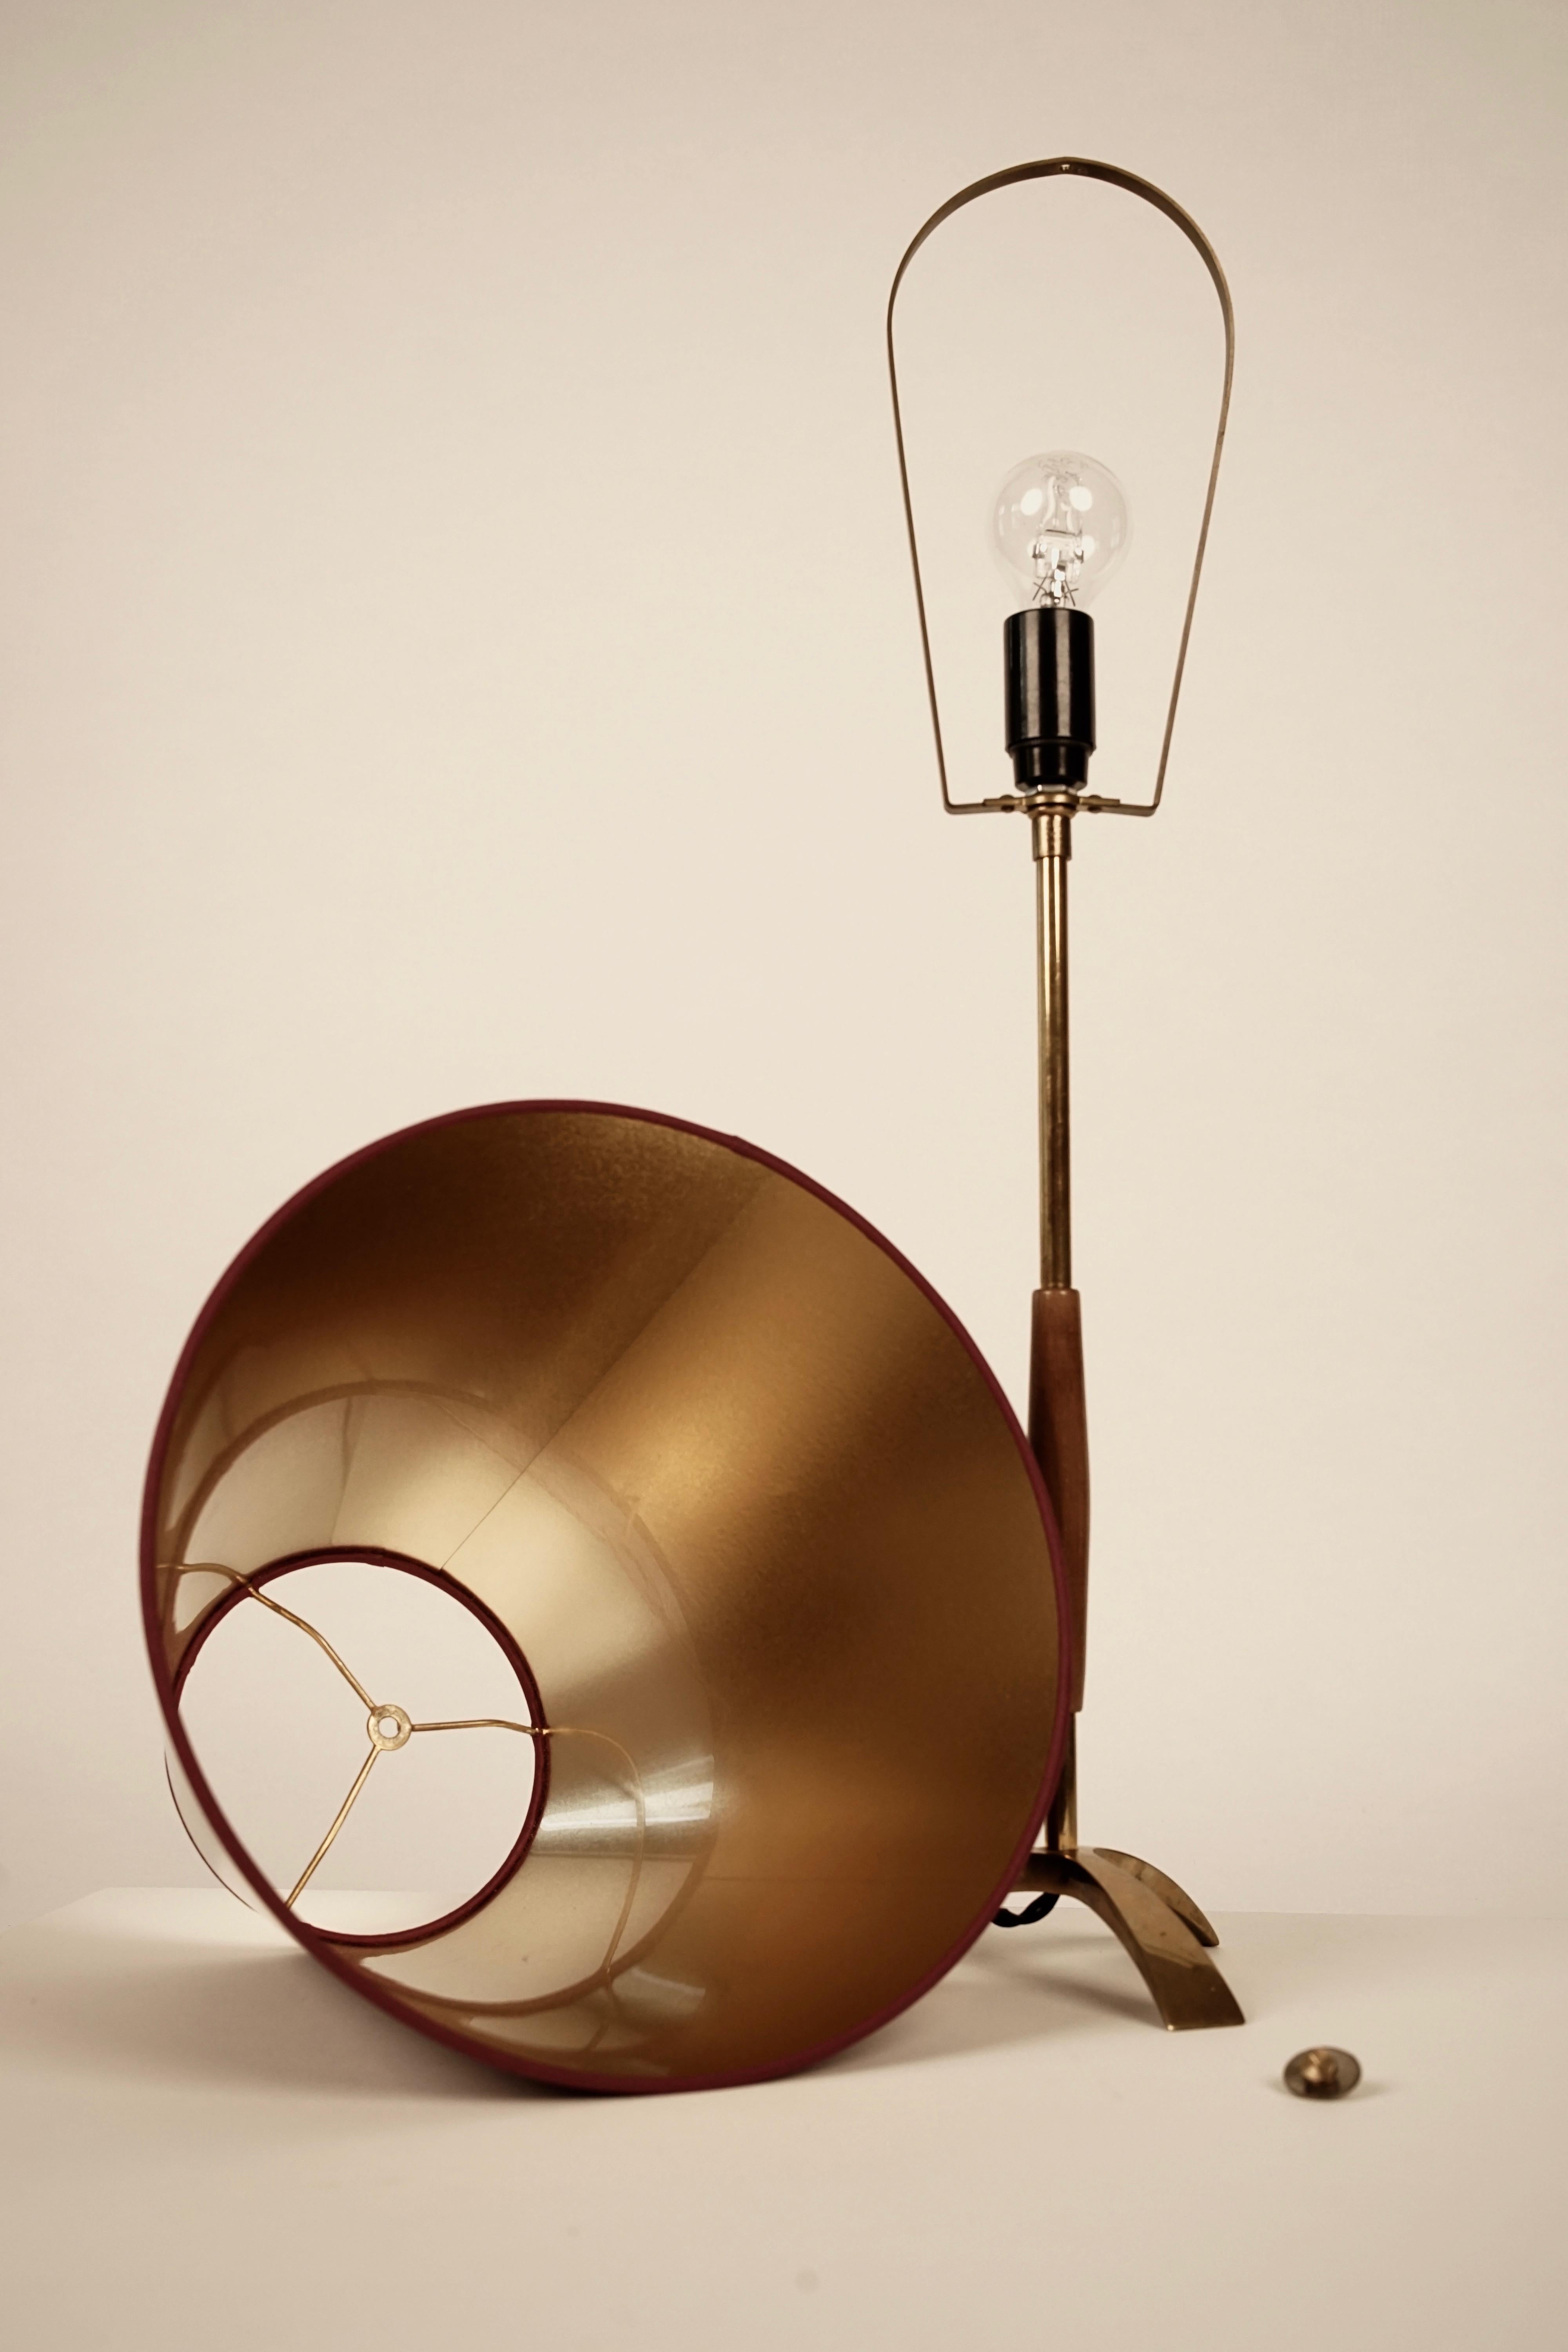 Midcentury Brass and Wood J. T. Kalmar Table Lamp In Good Condition For Sale In Vienna, Austria